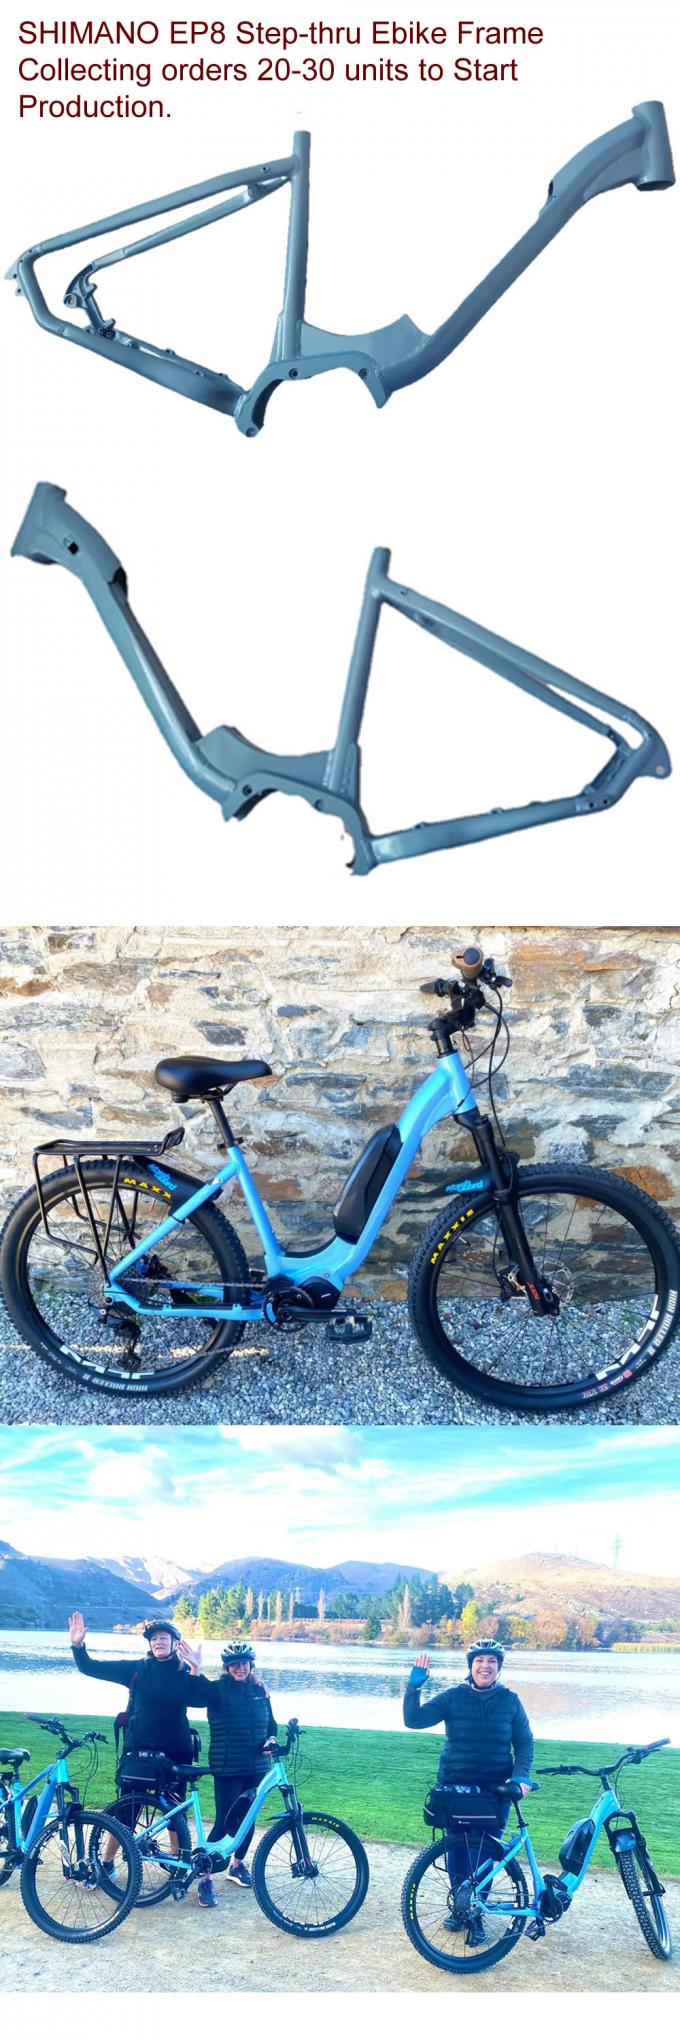 Customed Shimano EP8 Mid-Drive Electric Bike Frame with 700c 27.5 or 29er Ebike Conversion Kit 6